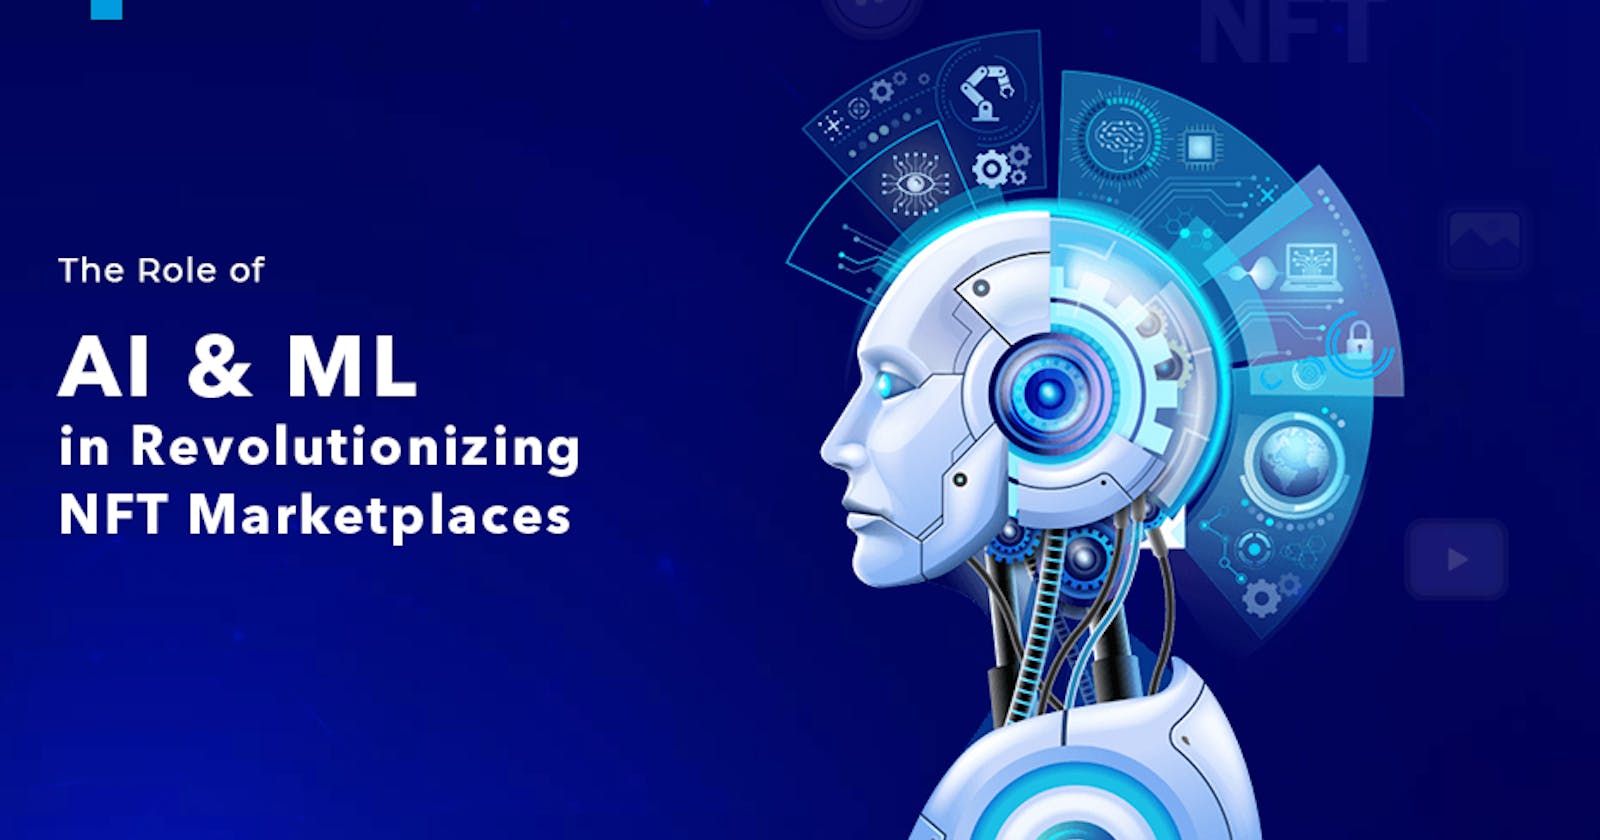 Harness The Synergy of AI and ML in the NFT Marketplace Ecosystem